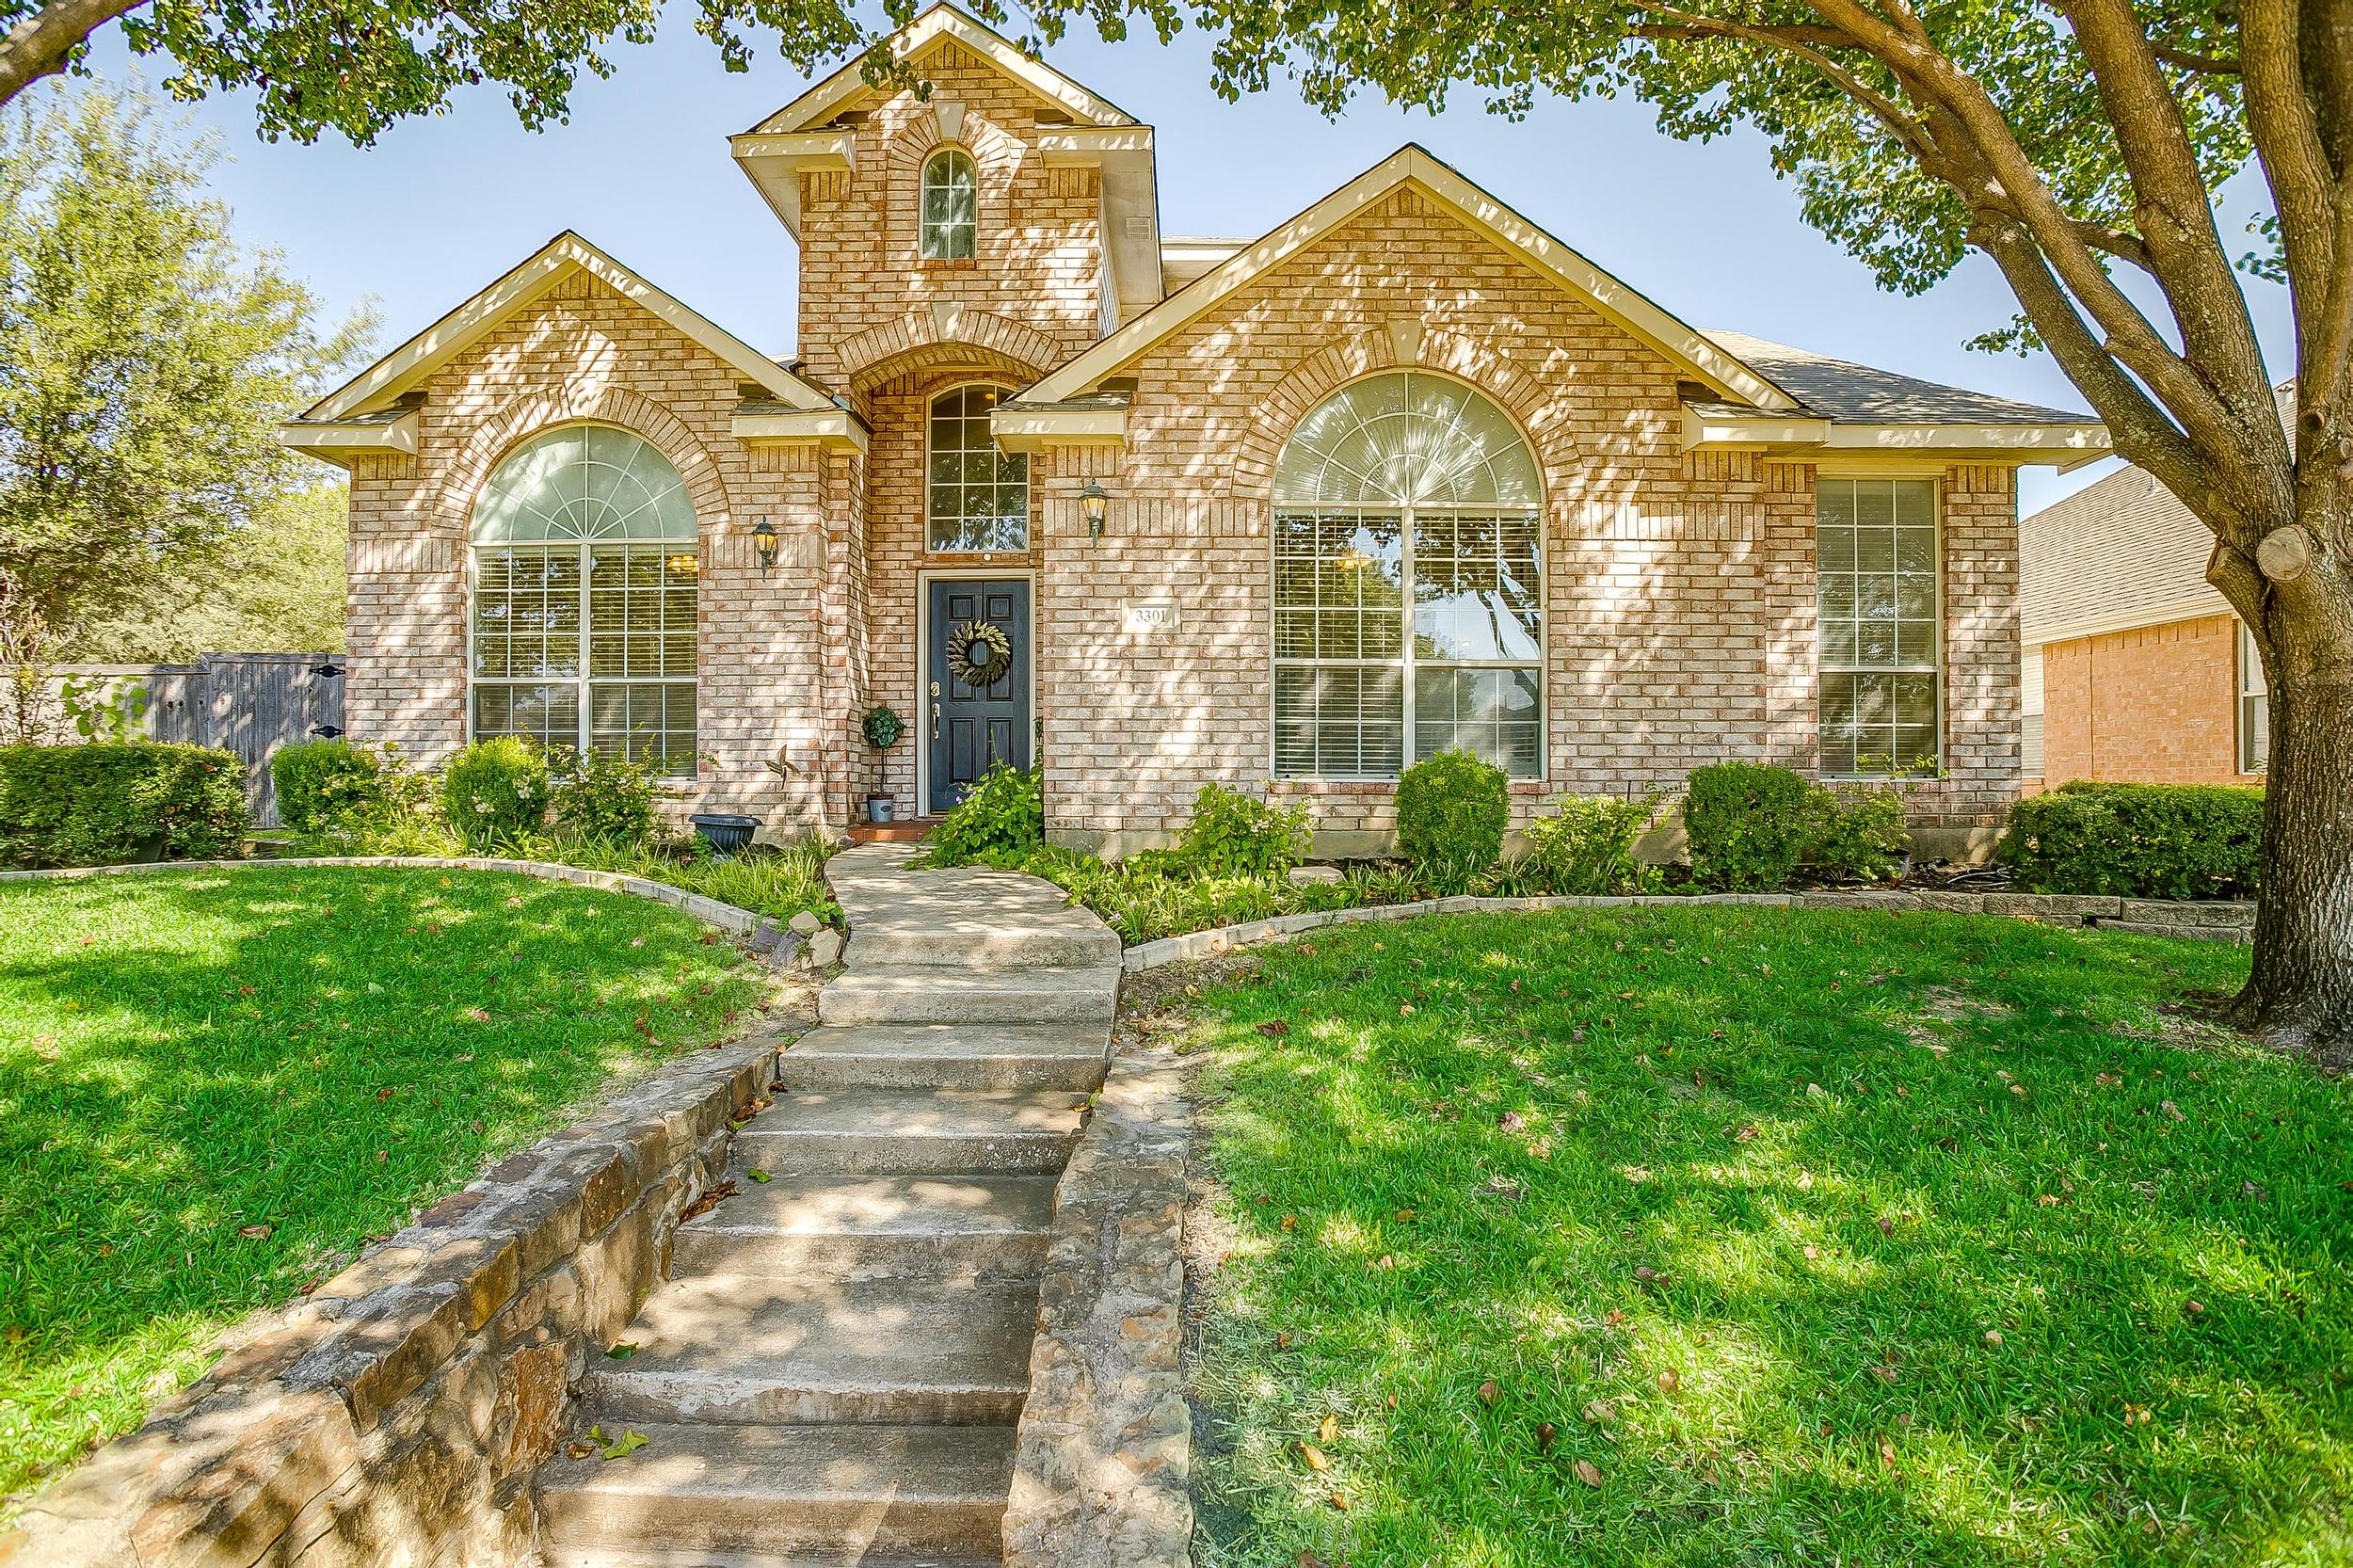 Expert help in finding Plano investment properties.